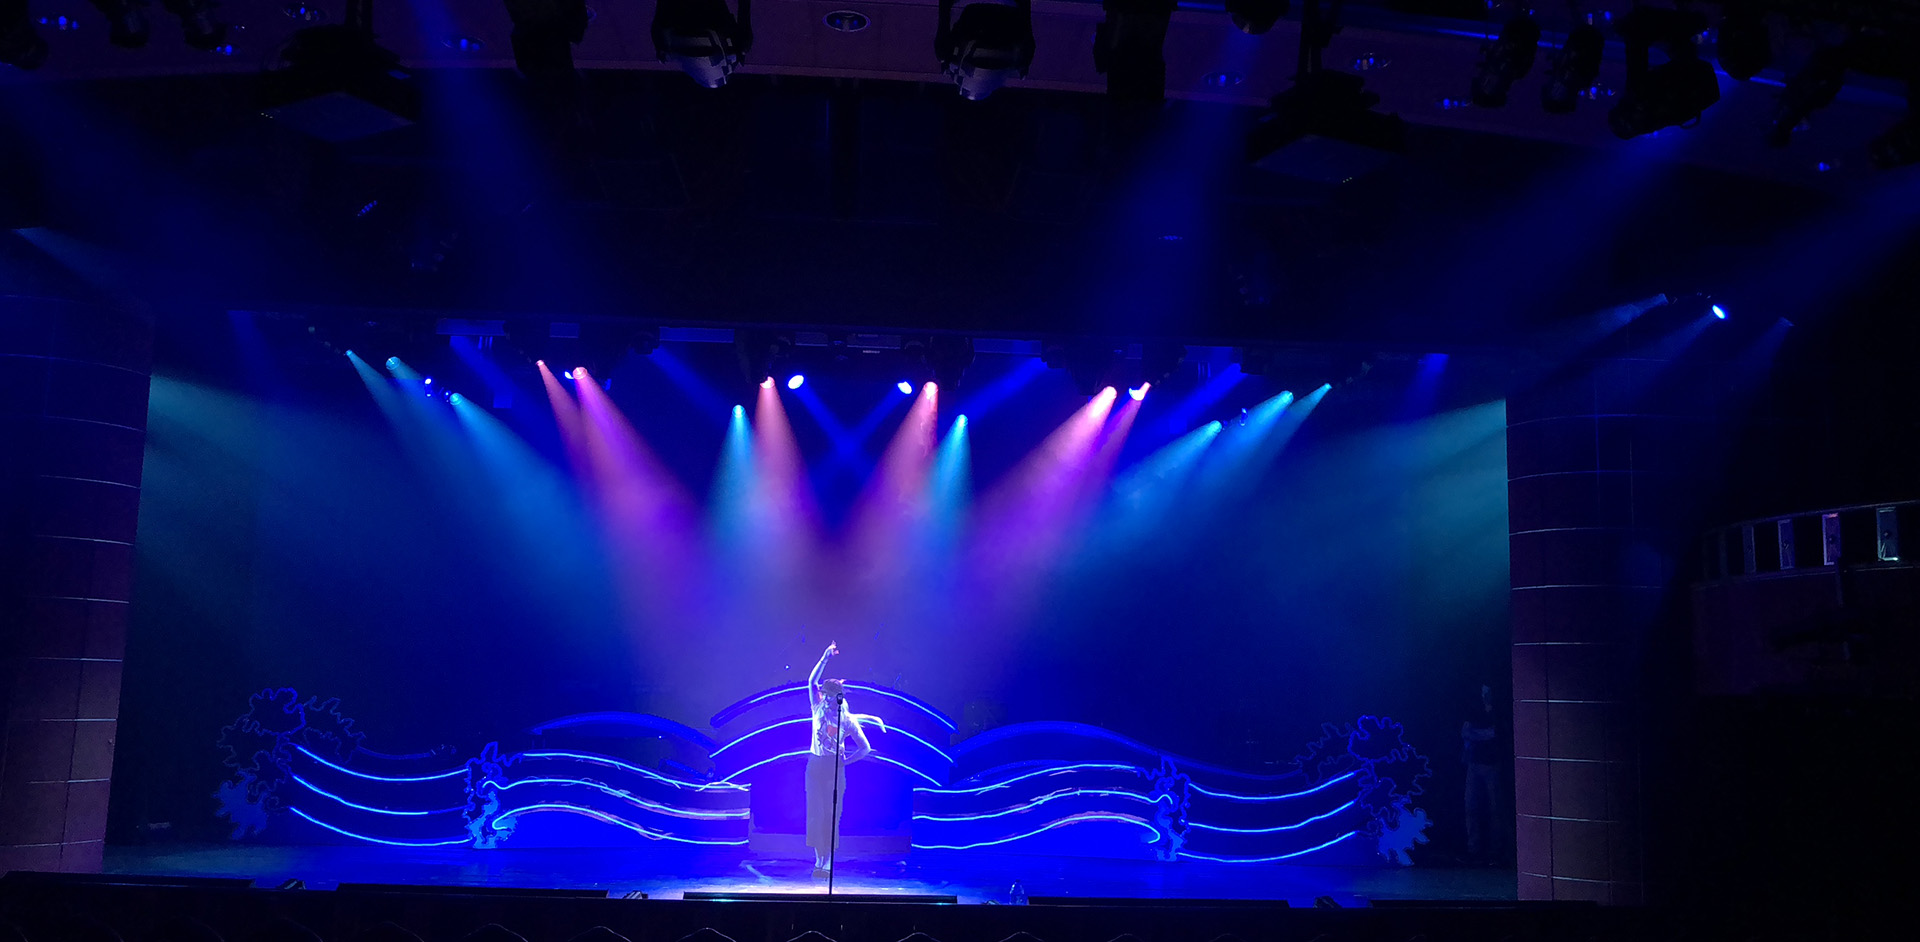 Golden Princess Brings World-Class Production to the High Seas with HARMAN Professional Solutions